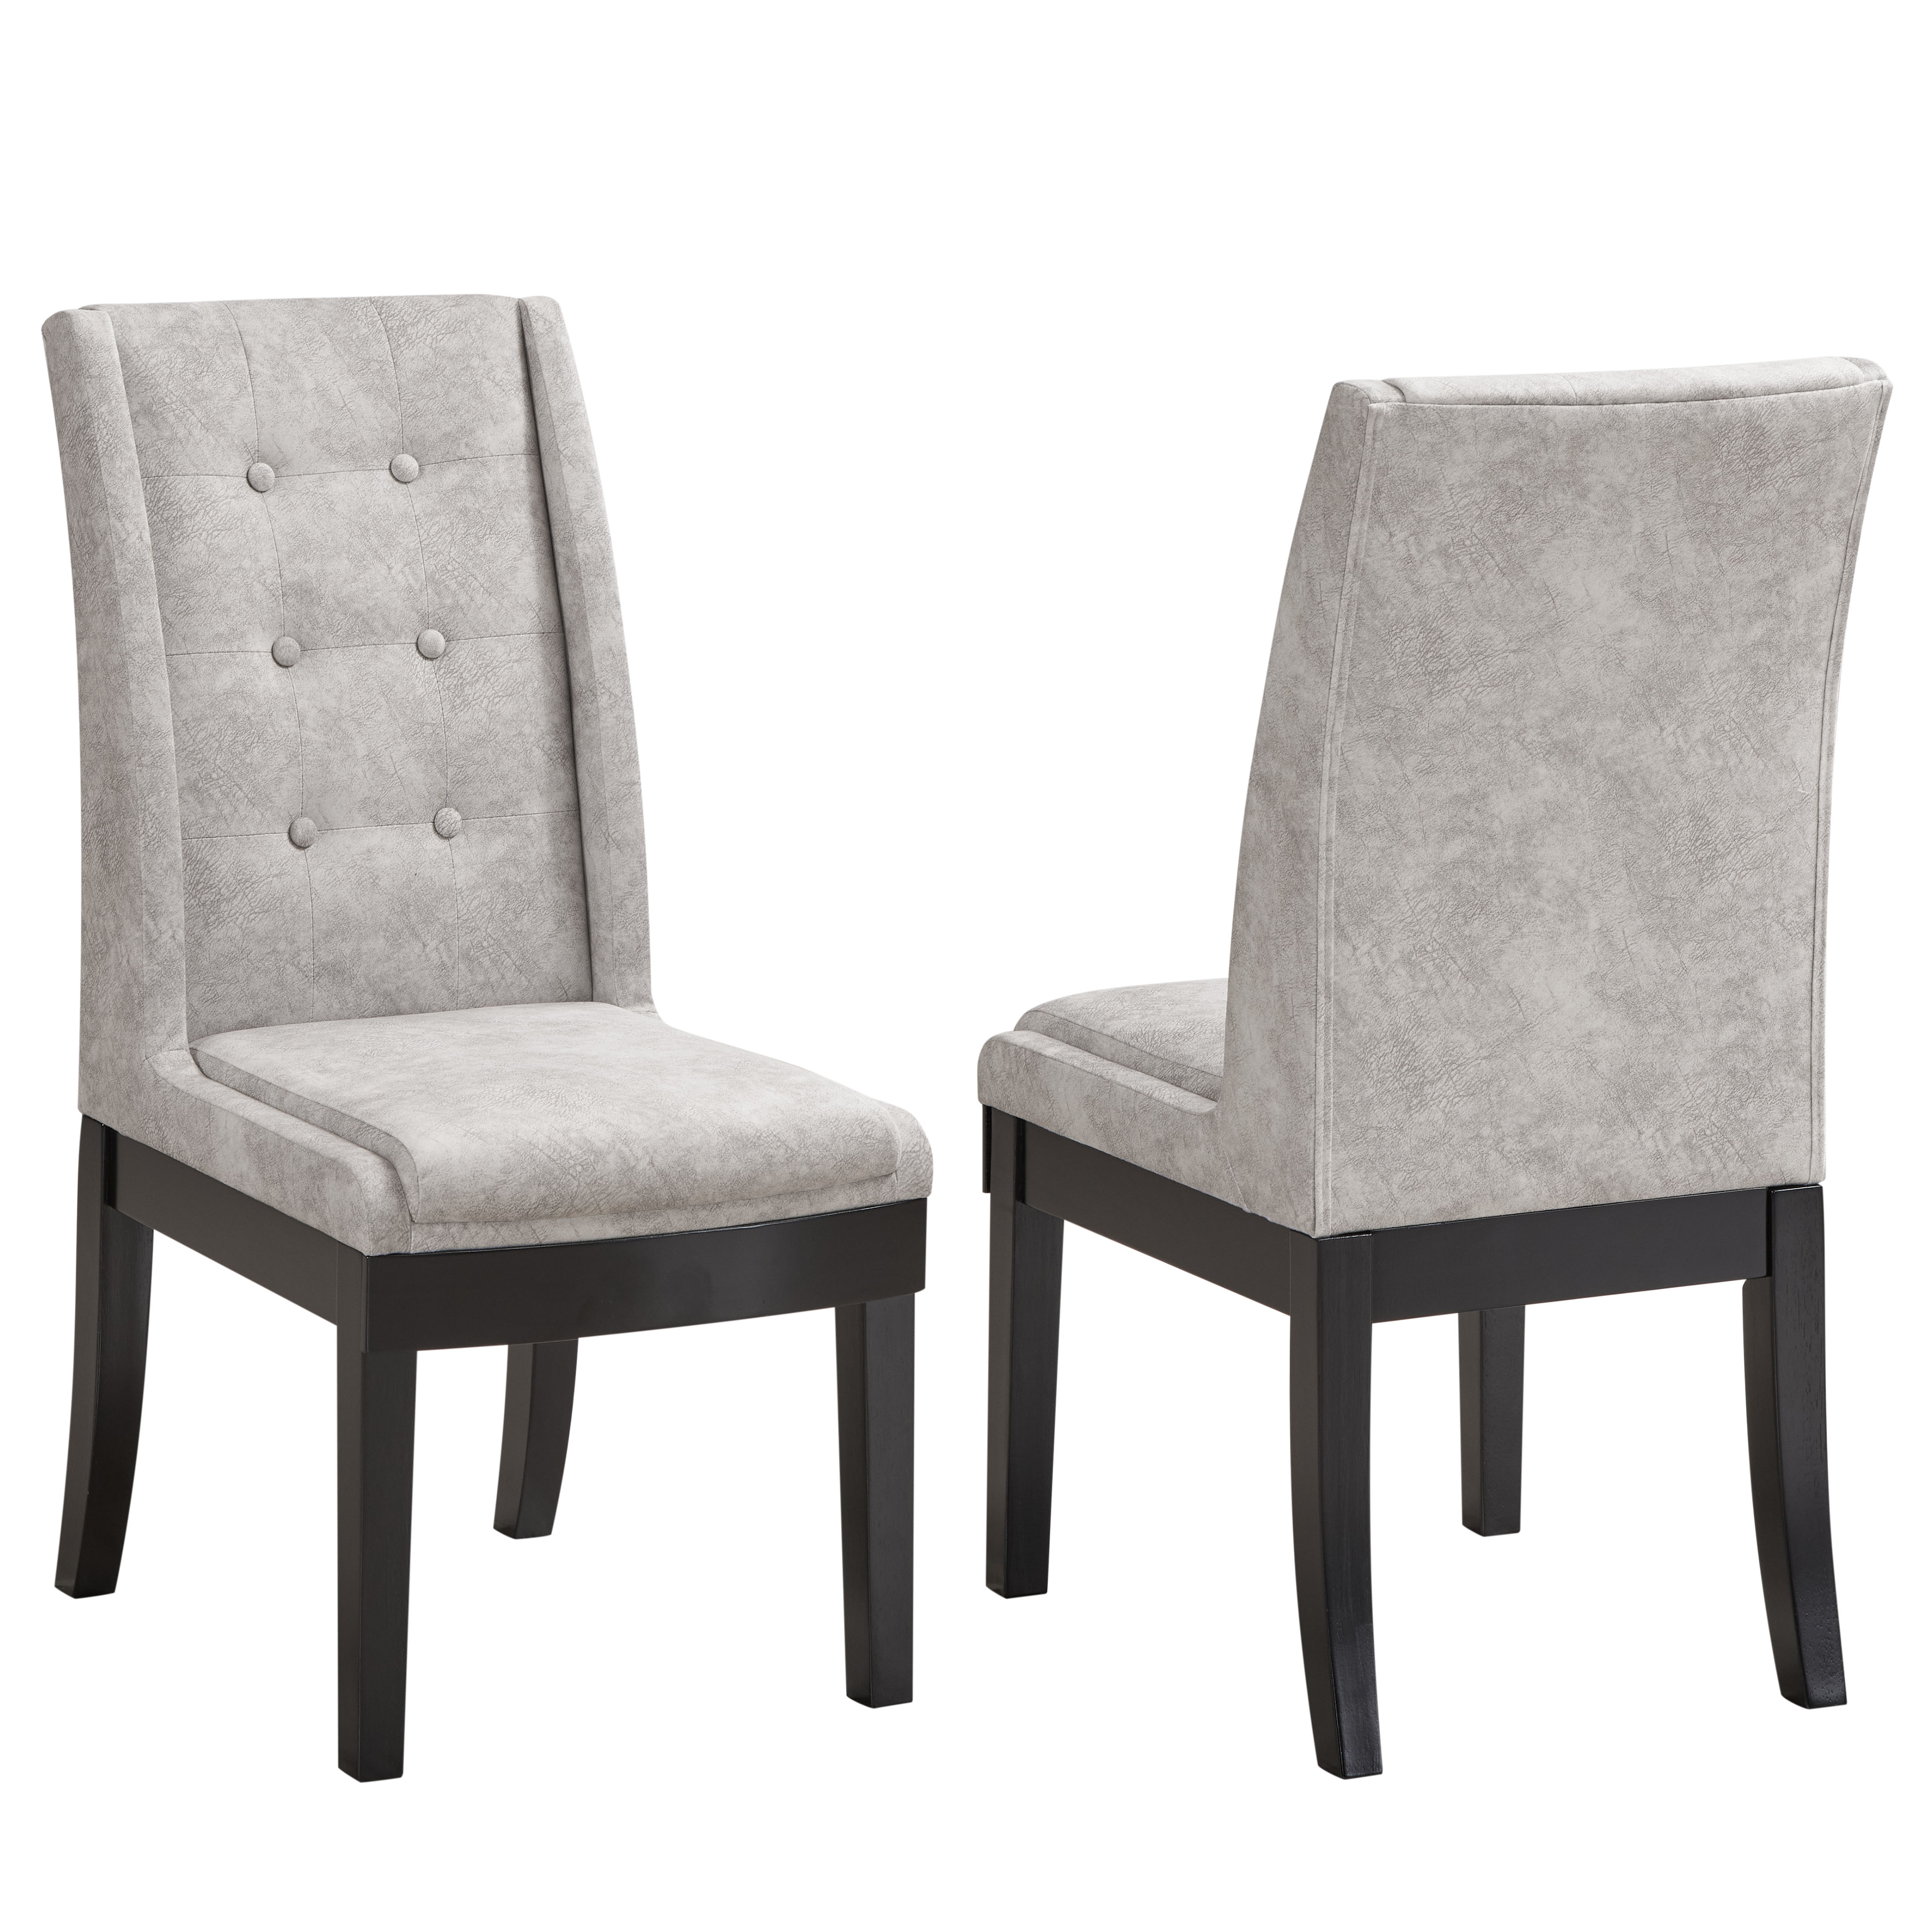 Bierce Dining Chairs (Silver) - Set of 2